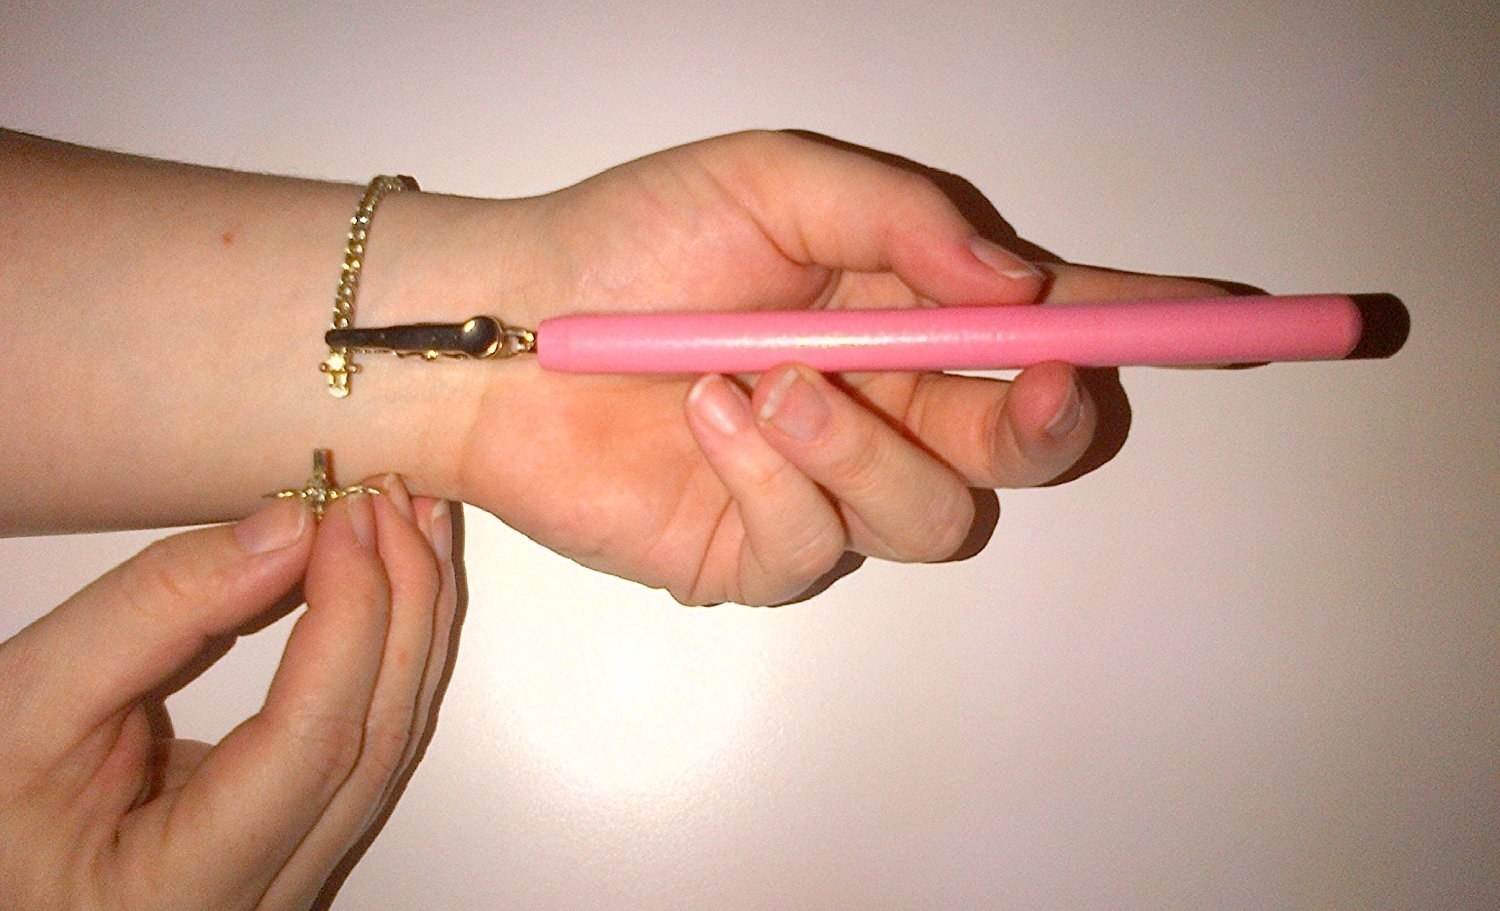 A hand holding a long-handled tool with a gripper to grip one end of a bracelet; a free hand to connects the clasp on the other end of the bracelet